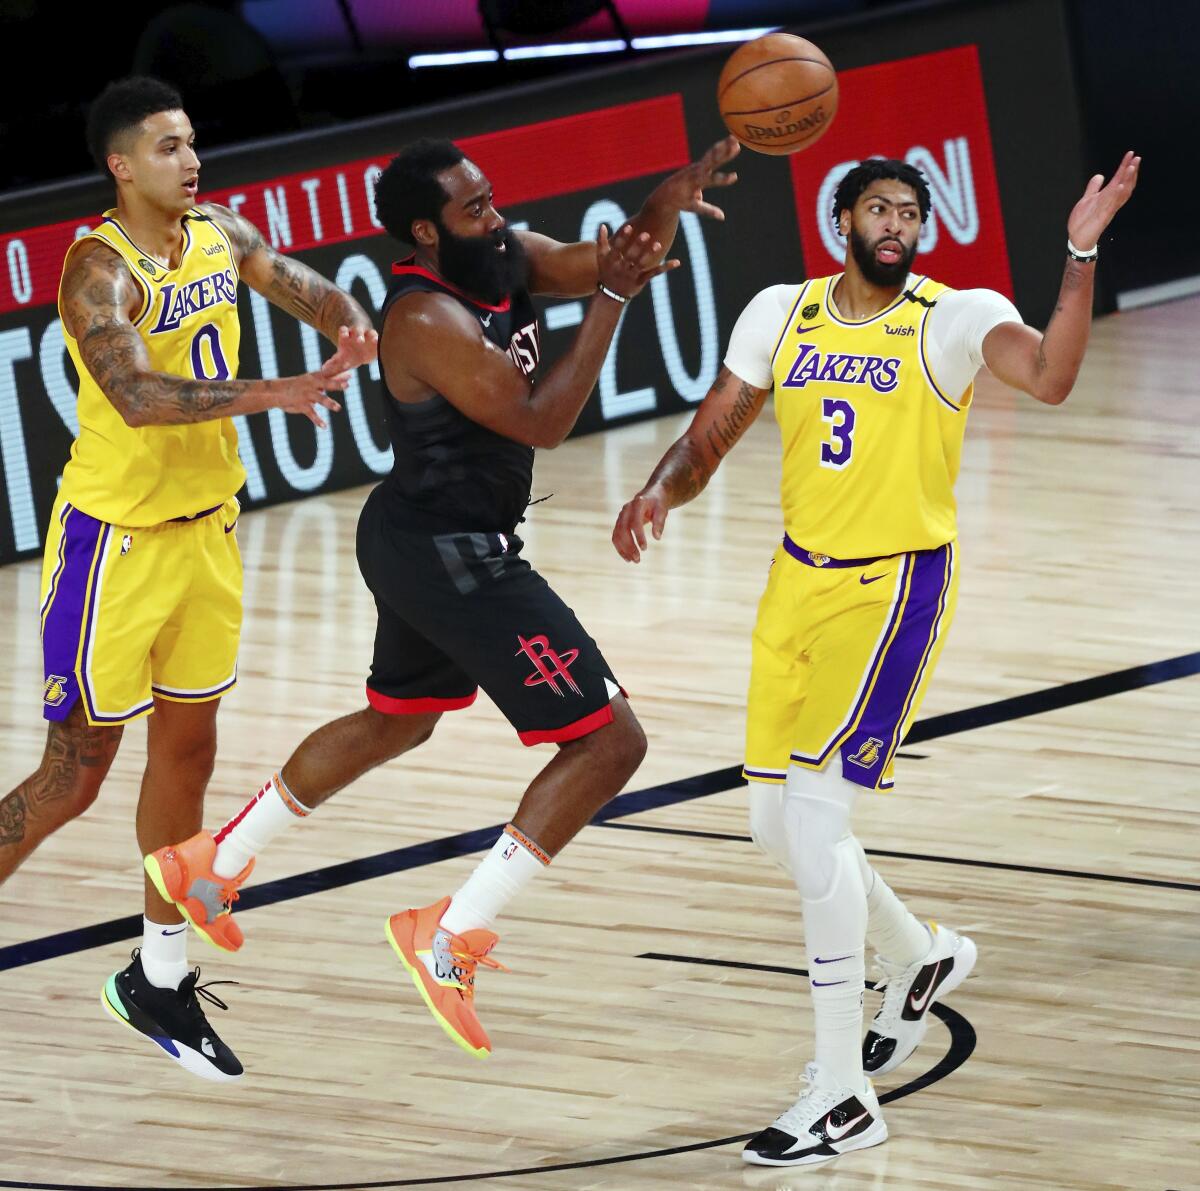 Rockets guard James Harden, center, passes the ball while defended by Lakers forwards Kyle Kuzma, left, and Anthony Davis.